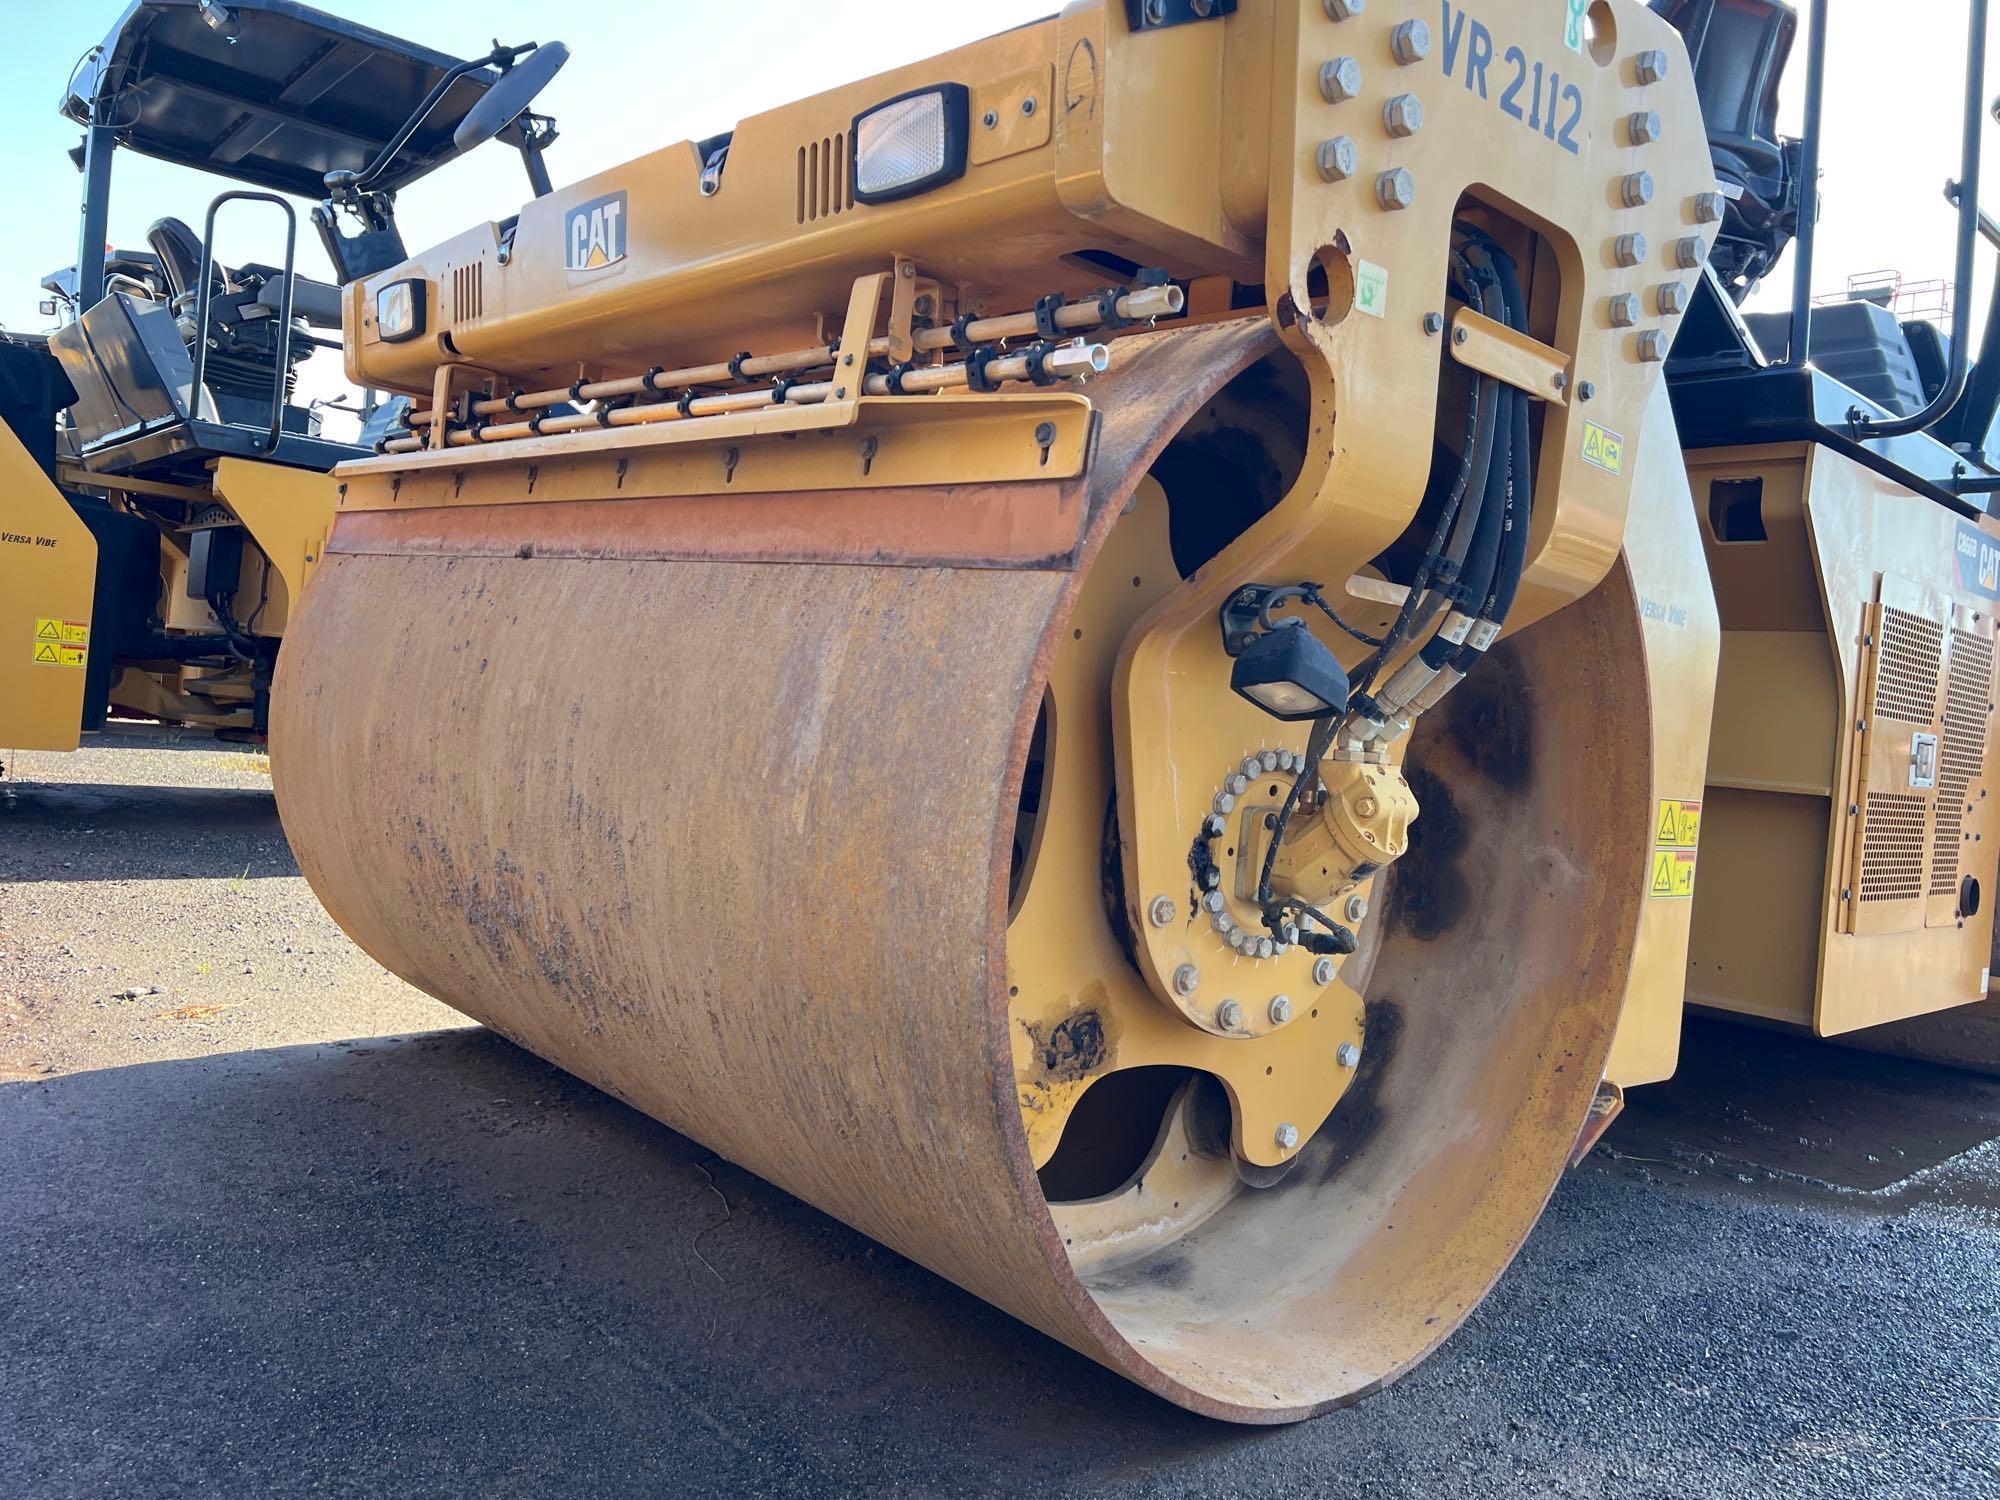 2017 CAT CB66B ASPHALT ROLLER SN:B6600247 powered by Cat diesel engine, equipped with OROPS, 84in.